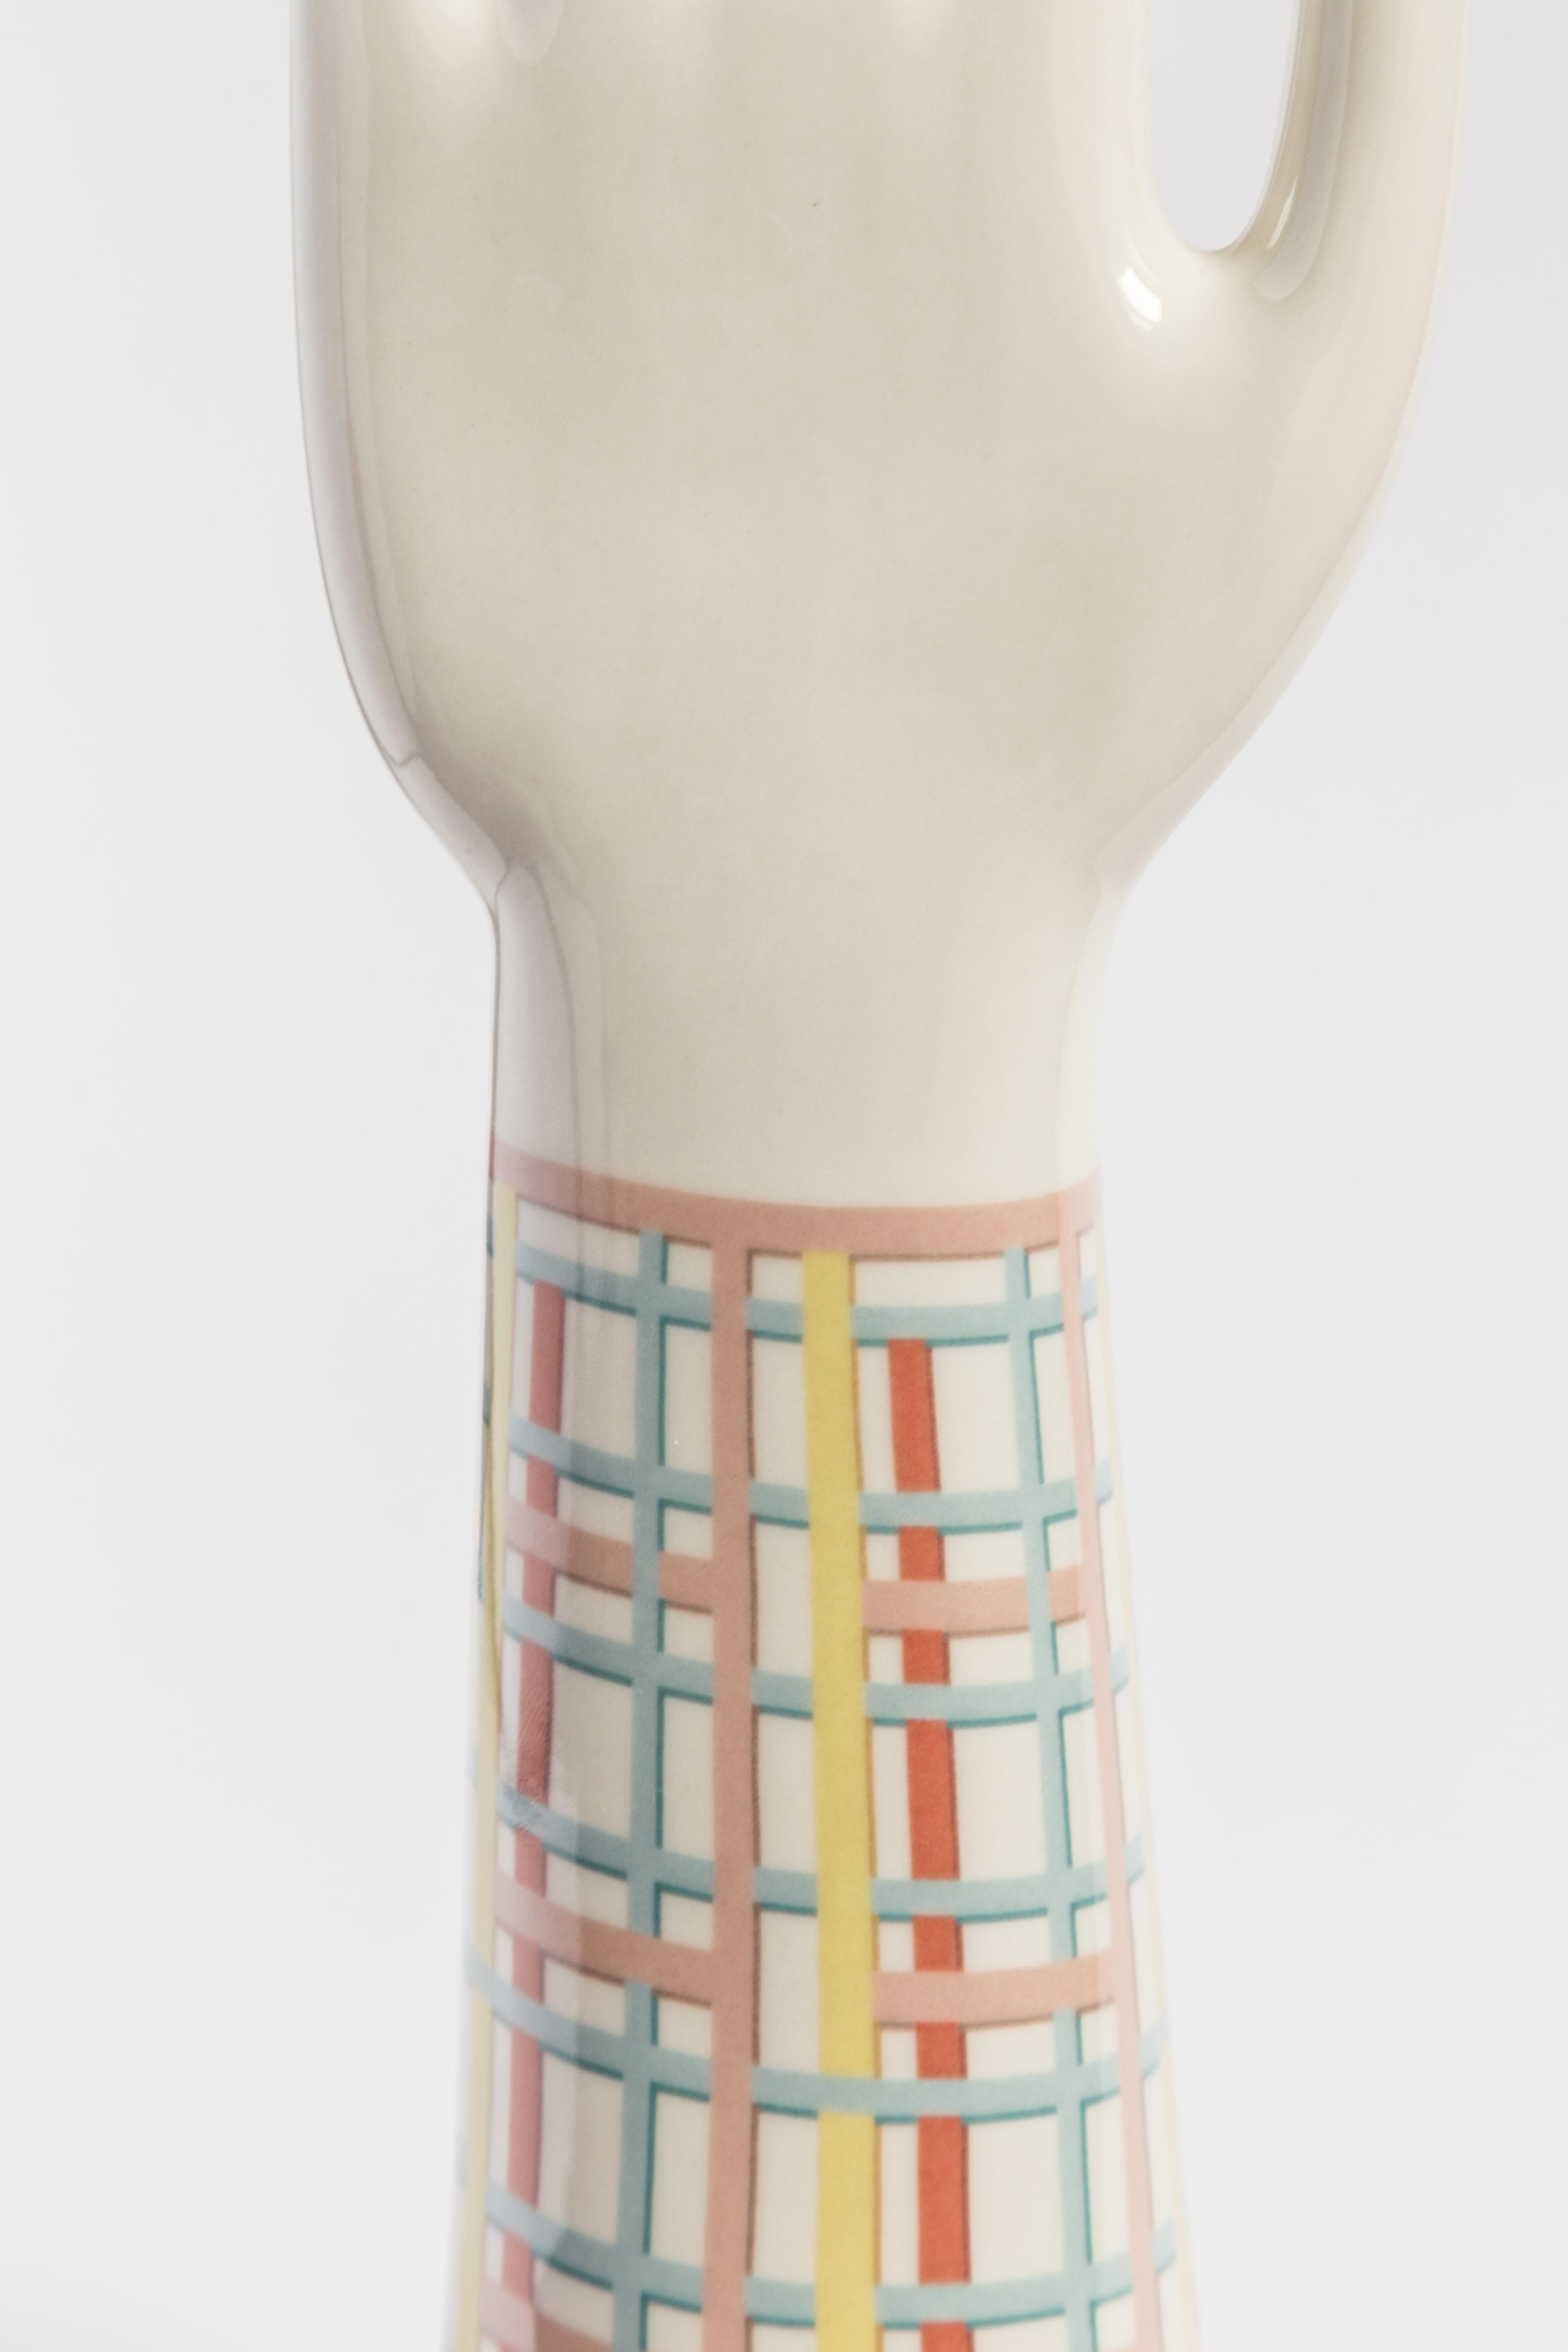 Italian Anatomica, Porcelain Hand with 1990s Grid Decoration by Vito Nesta For Sale